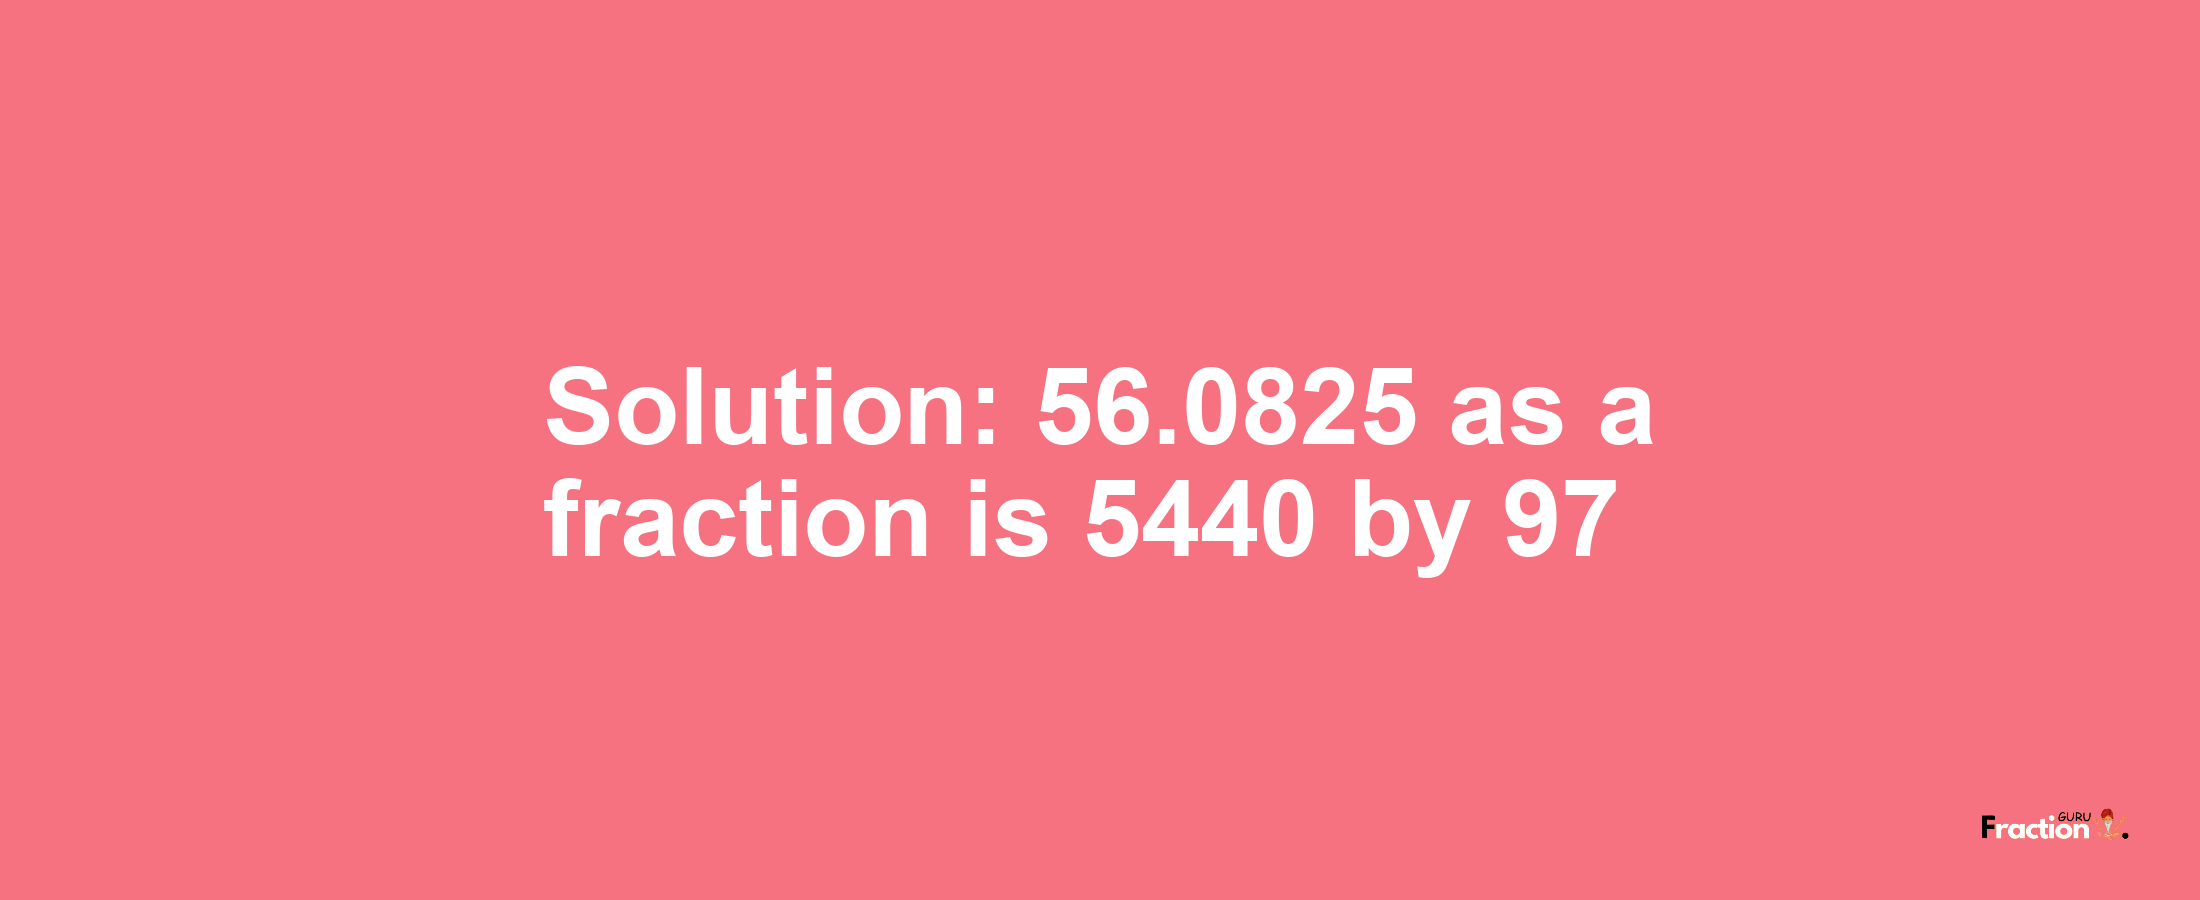 Solution:56.0825 as a fraction is 5440/97